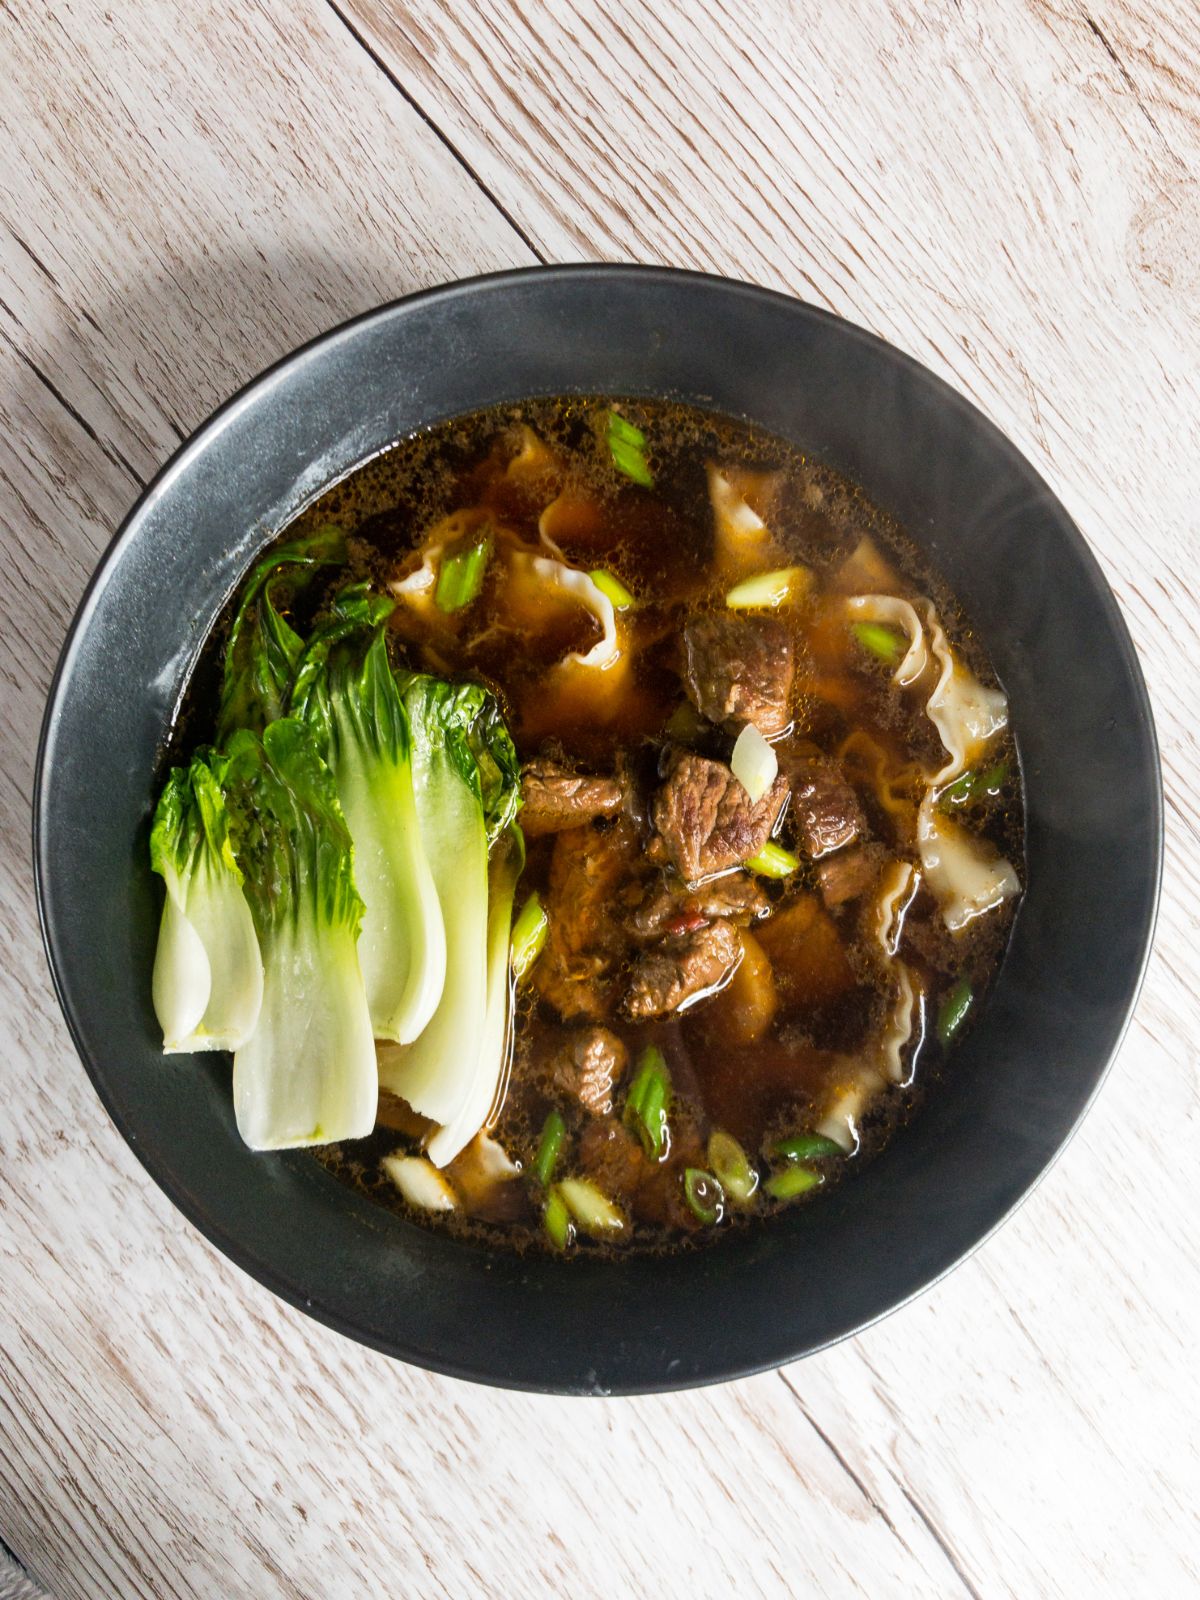 Recent Eats: Cathy Erway’s Taiwanese Beef Noodle Soup